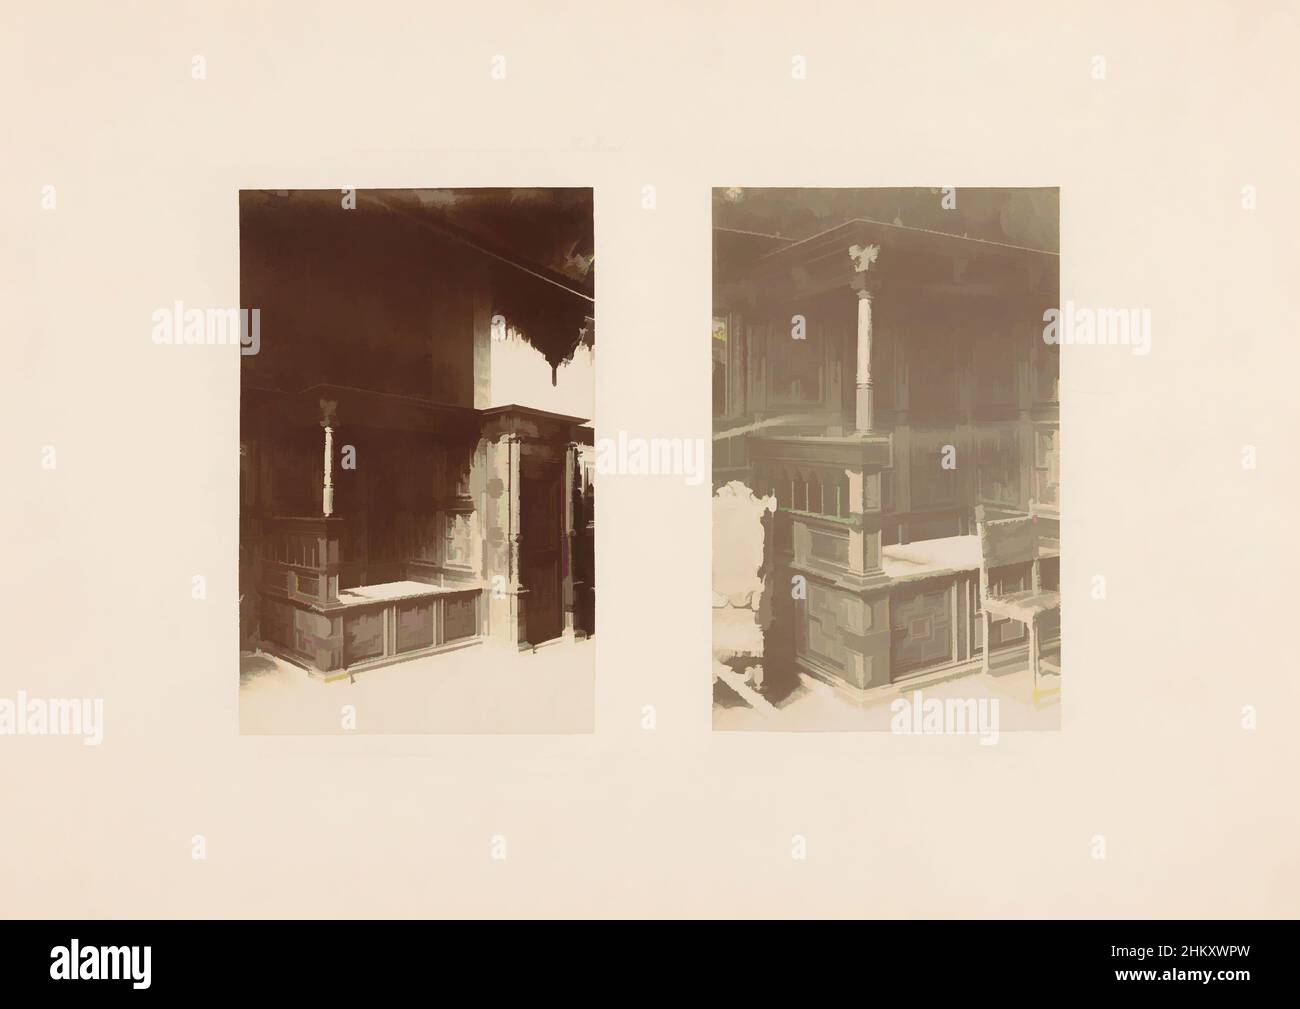 Art inspired by View of two views of a wall paneling with a bed, Left a front view of the wall paneling, Right a part of the wall paneling with two chairs., Netherlands, c. 1875 - c. 1900, cardboard, photographic support, height 315 mm × width 447 mm, Classic works modernized by Artotop with a splash of modernity. Shapes, color and value, eye-catching visual impact on art. Emotions through freedom of artworks in a contemporary way. A timeless message pursuing a wildly creative new direction. Artists turning to the digital medium and creating the Artotop NFT Stock Photo